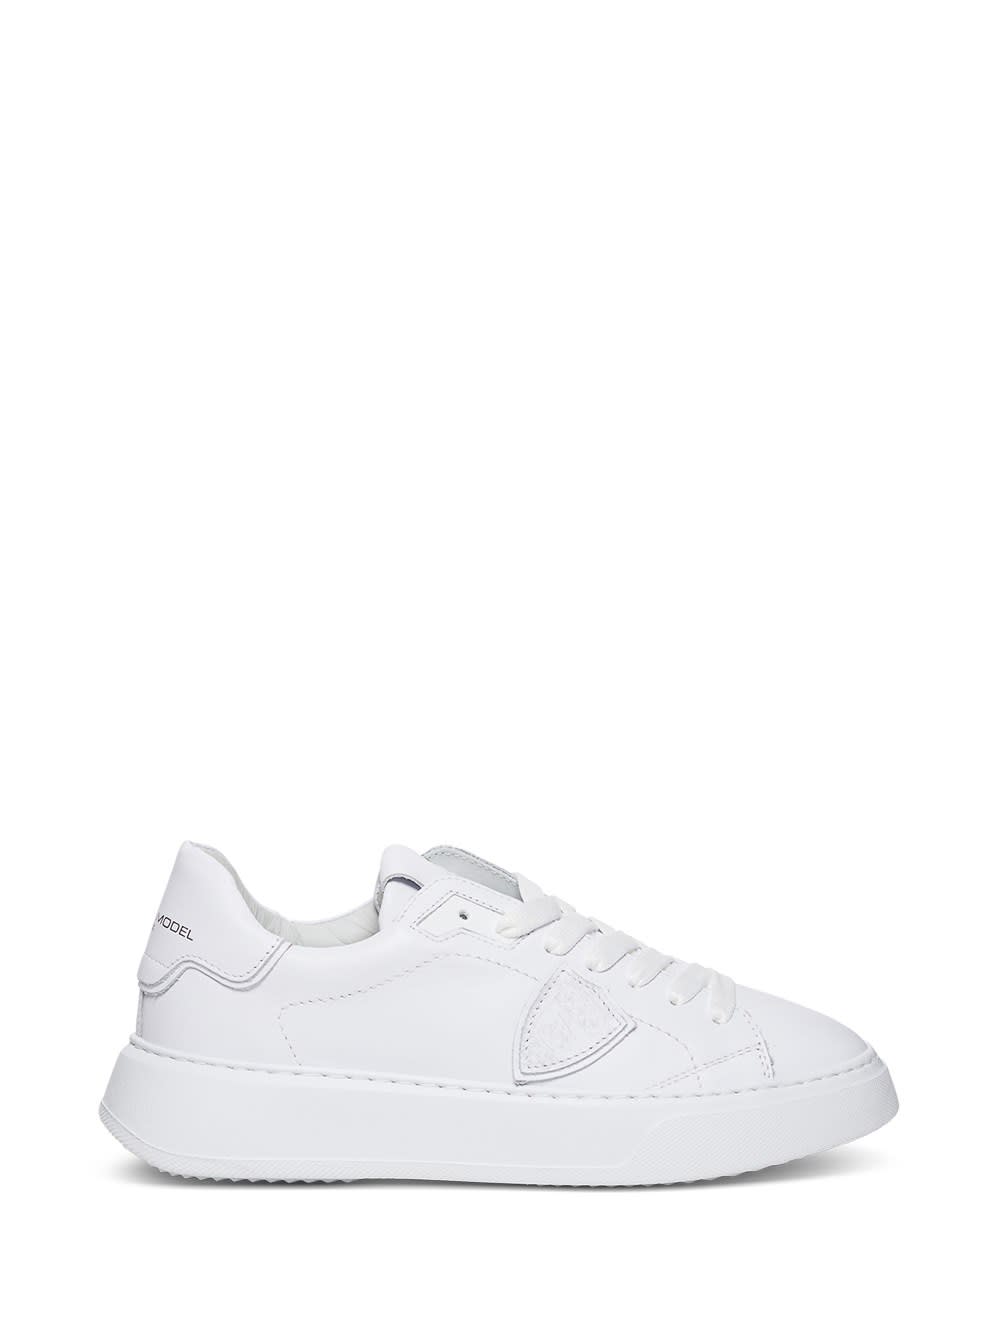 Philippe Model TEMPLE LOW SNEAKERS IN WHITE LEATHER